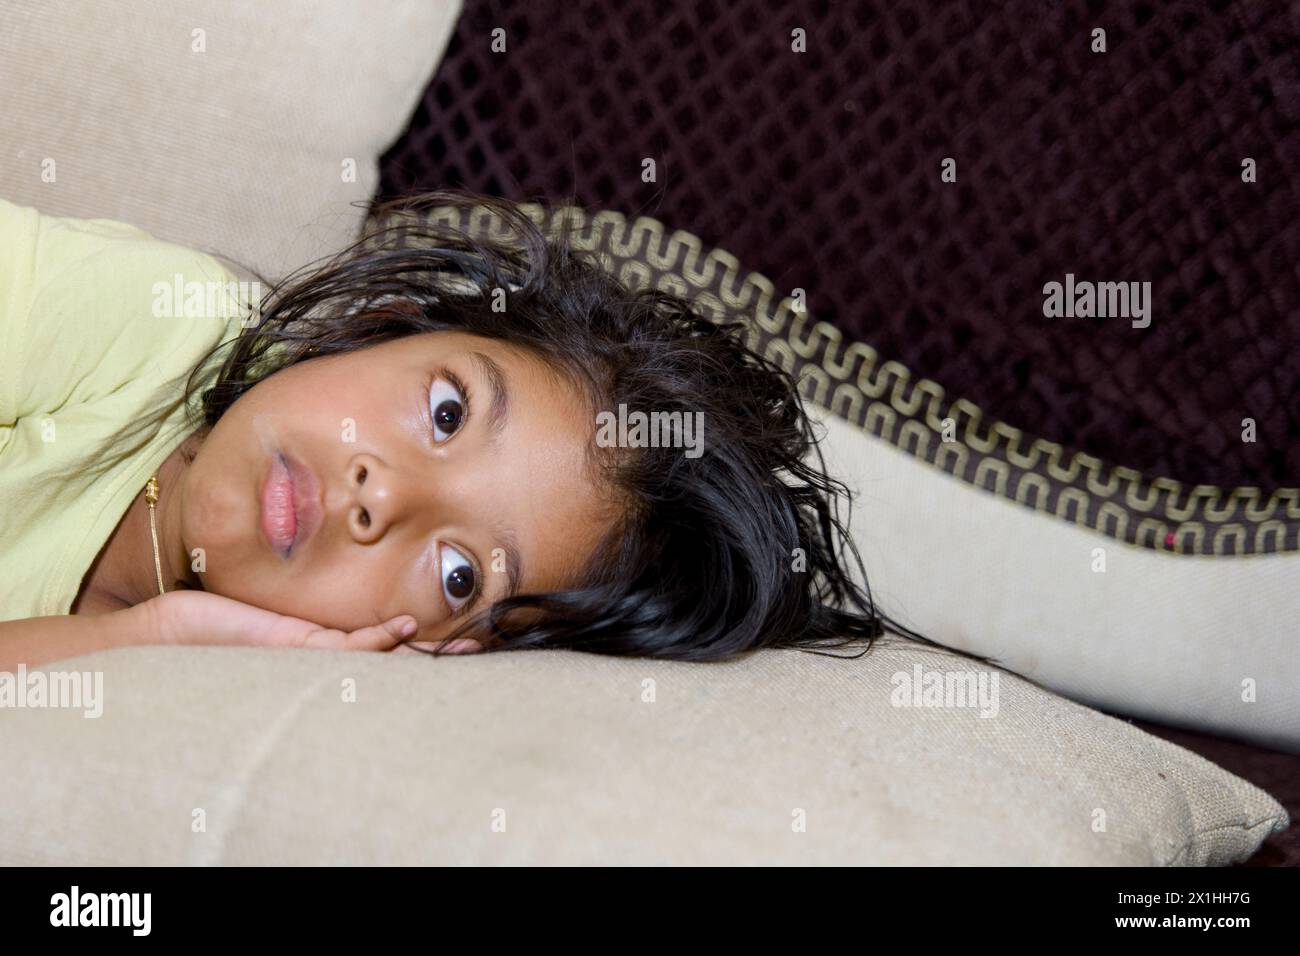 An image of a young girl lying on a couch in a living room, looking sad or disappointed. Stock Photo